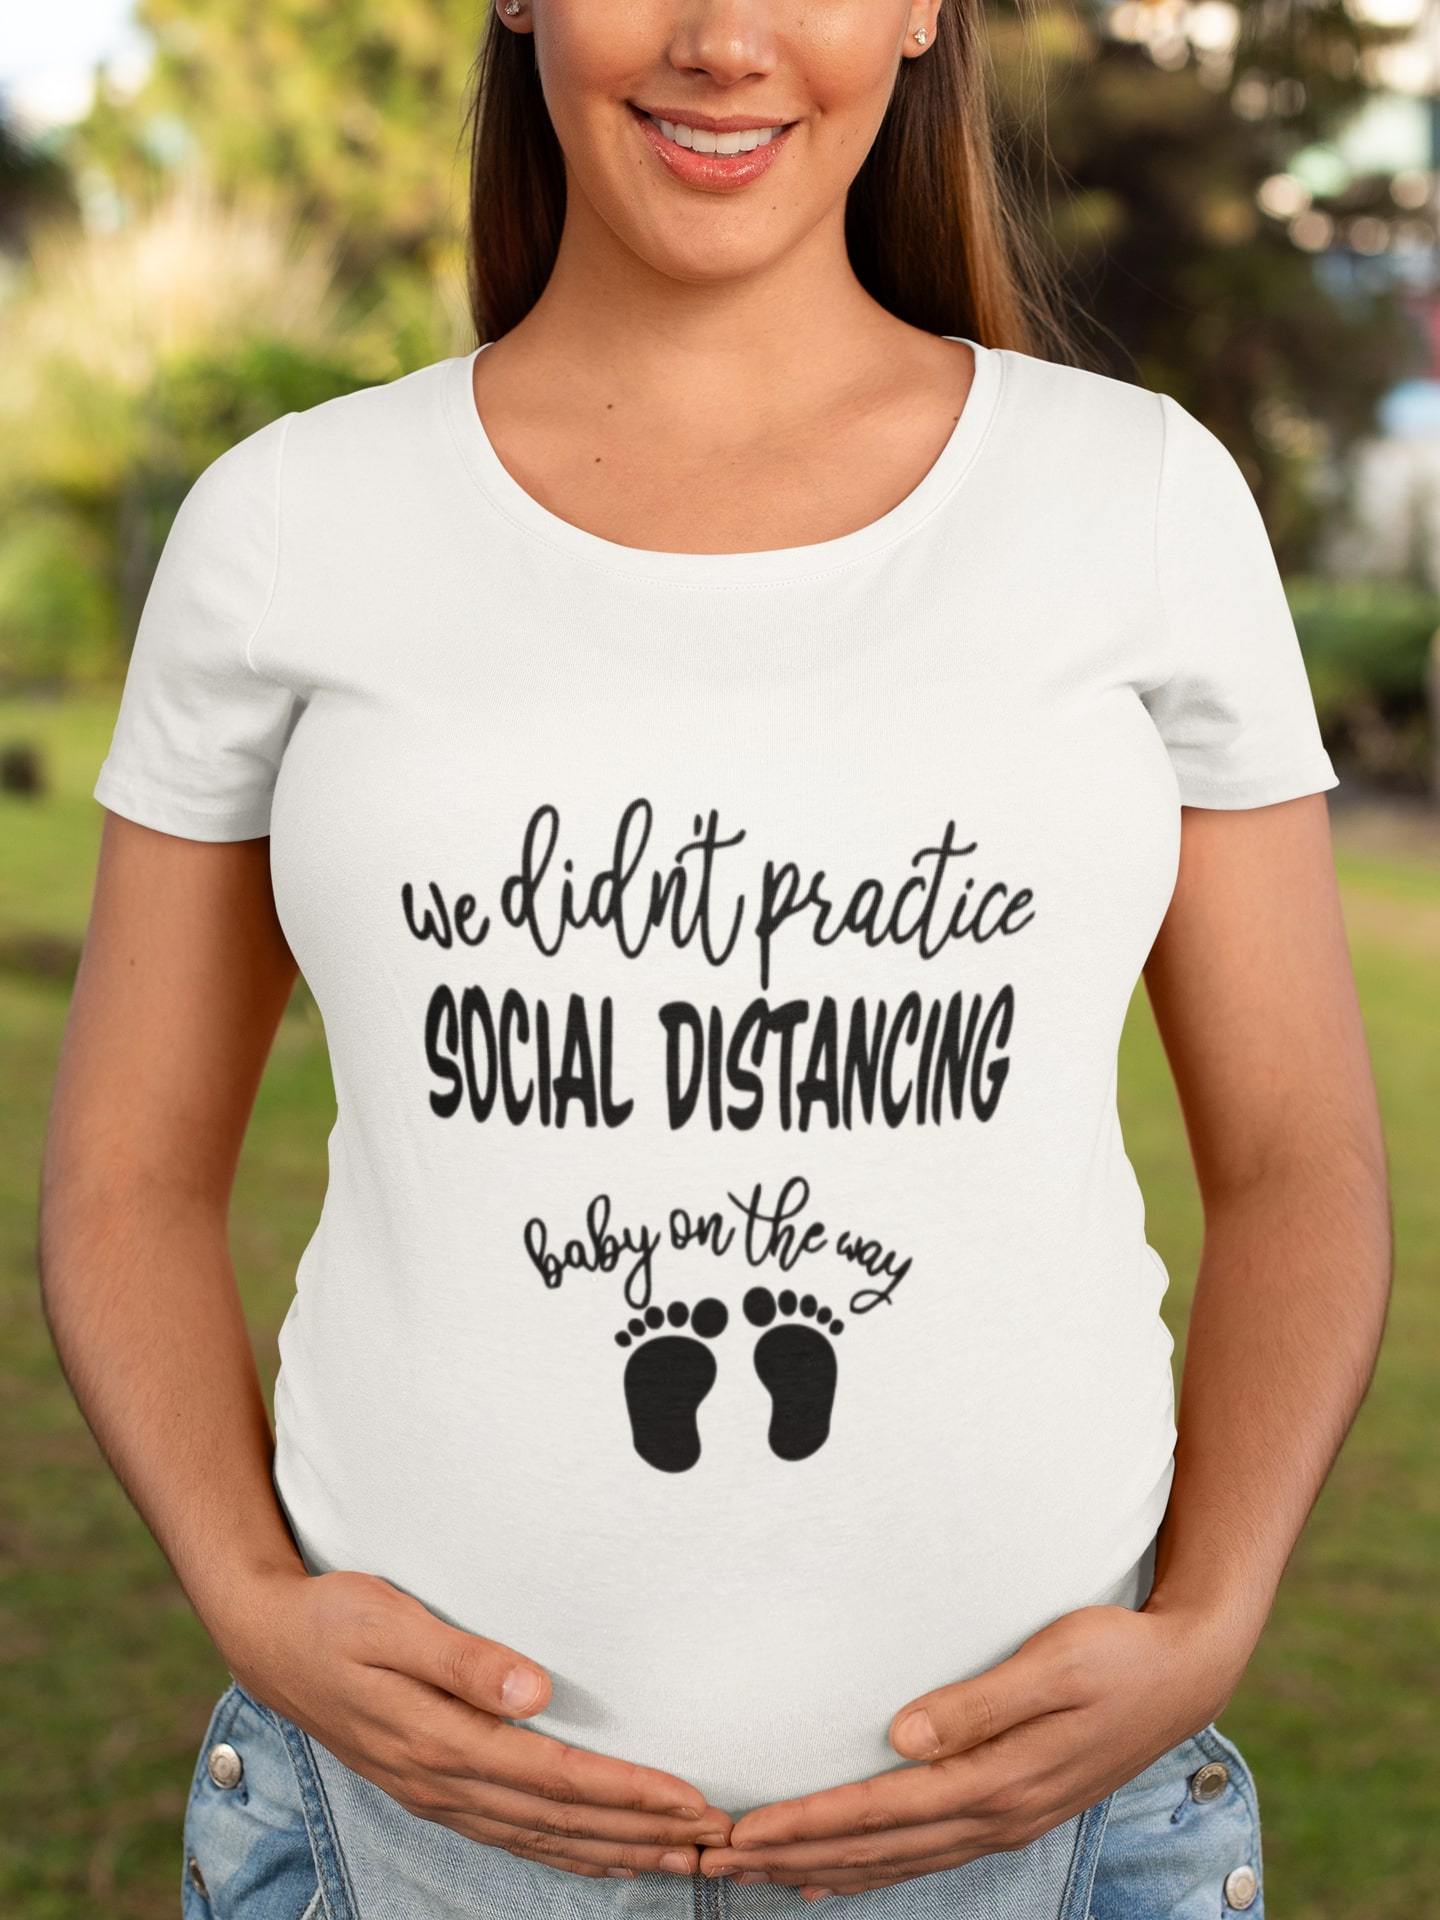 thelegalgang,No Social Distance Graphic Maternity T shirt,WOMEN.